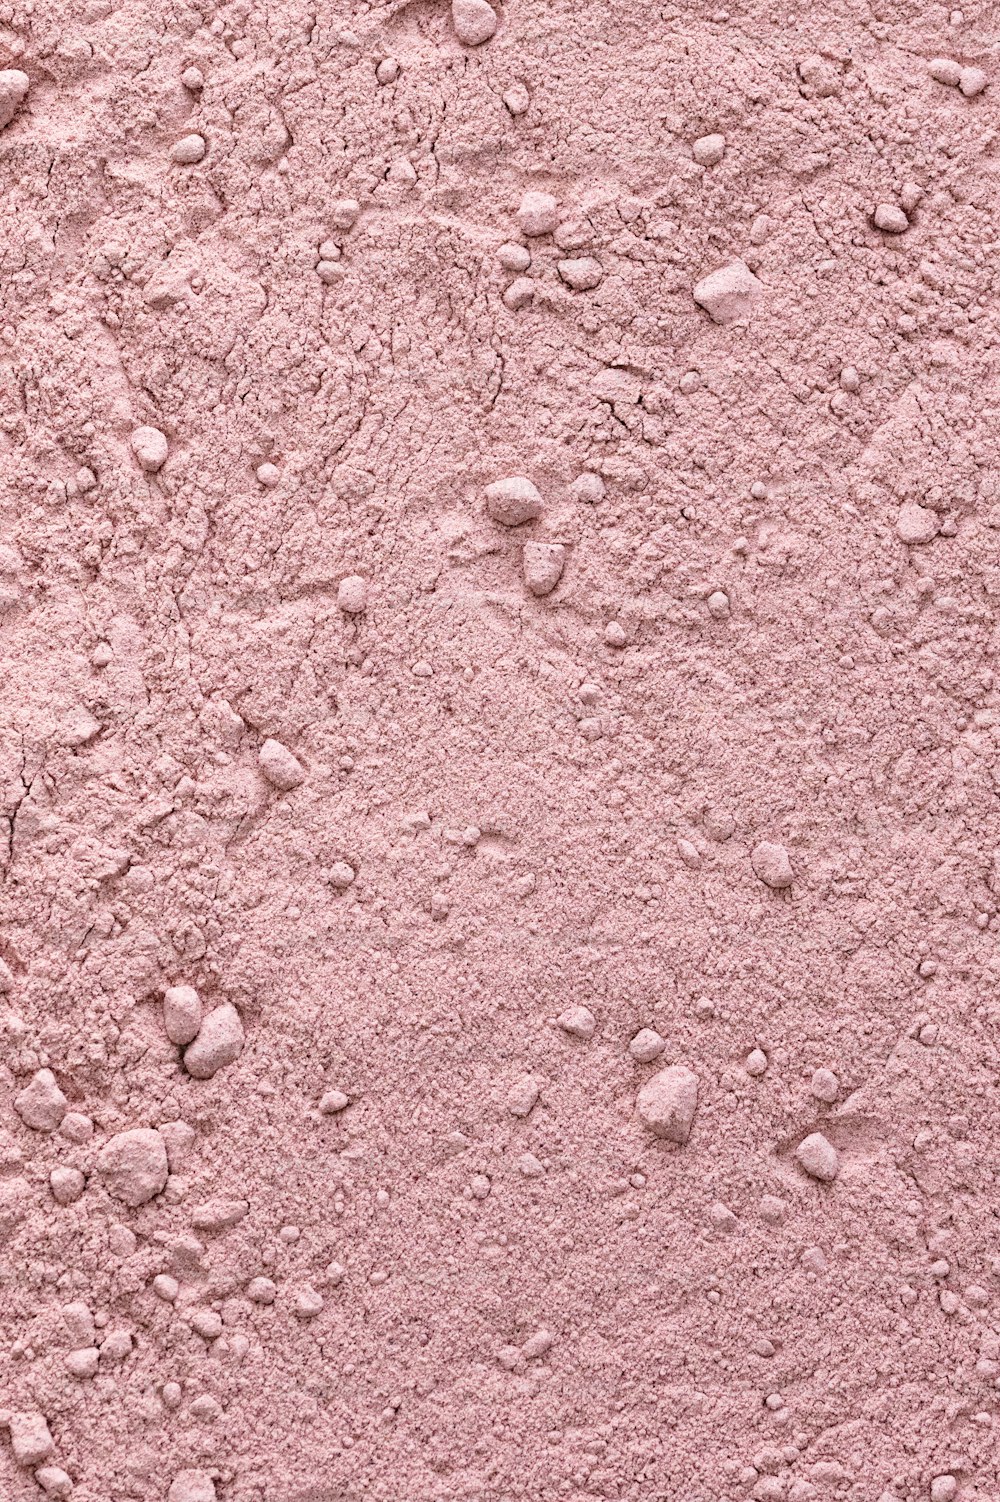 a close up of a pink wall with small rocks